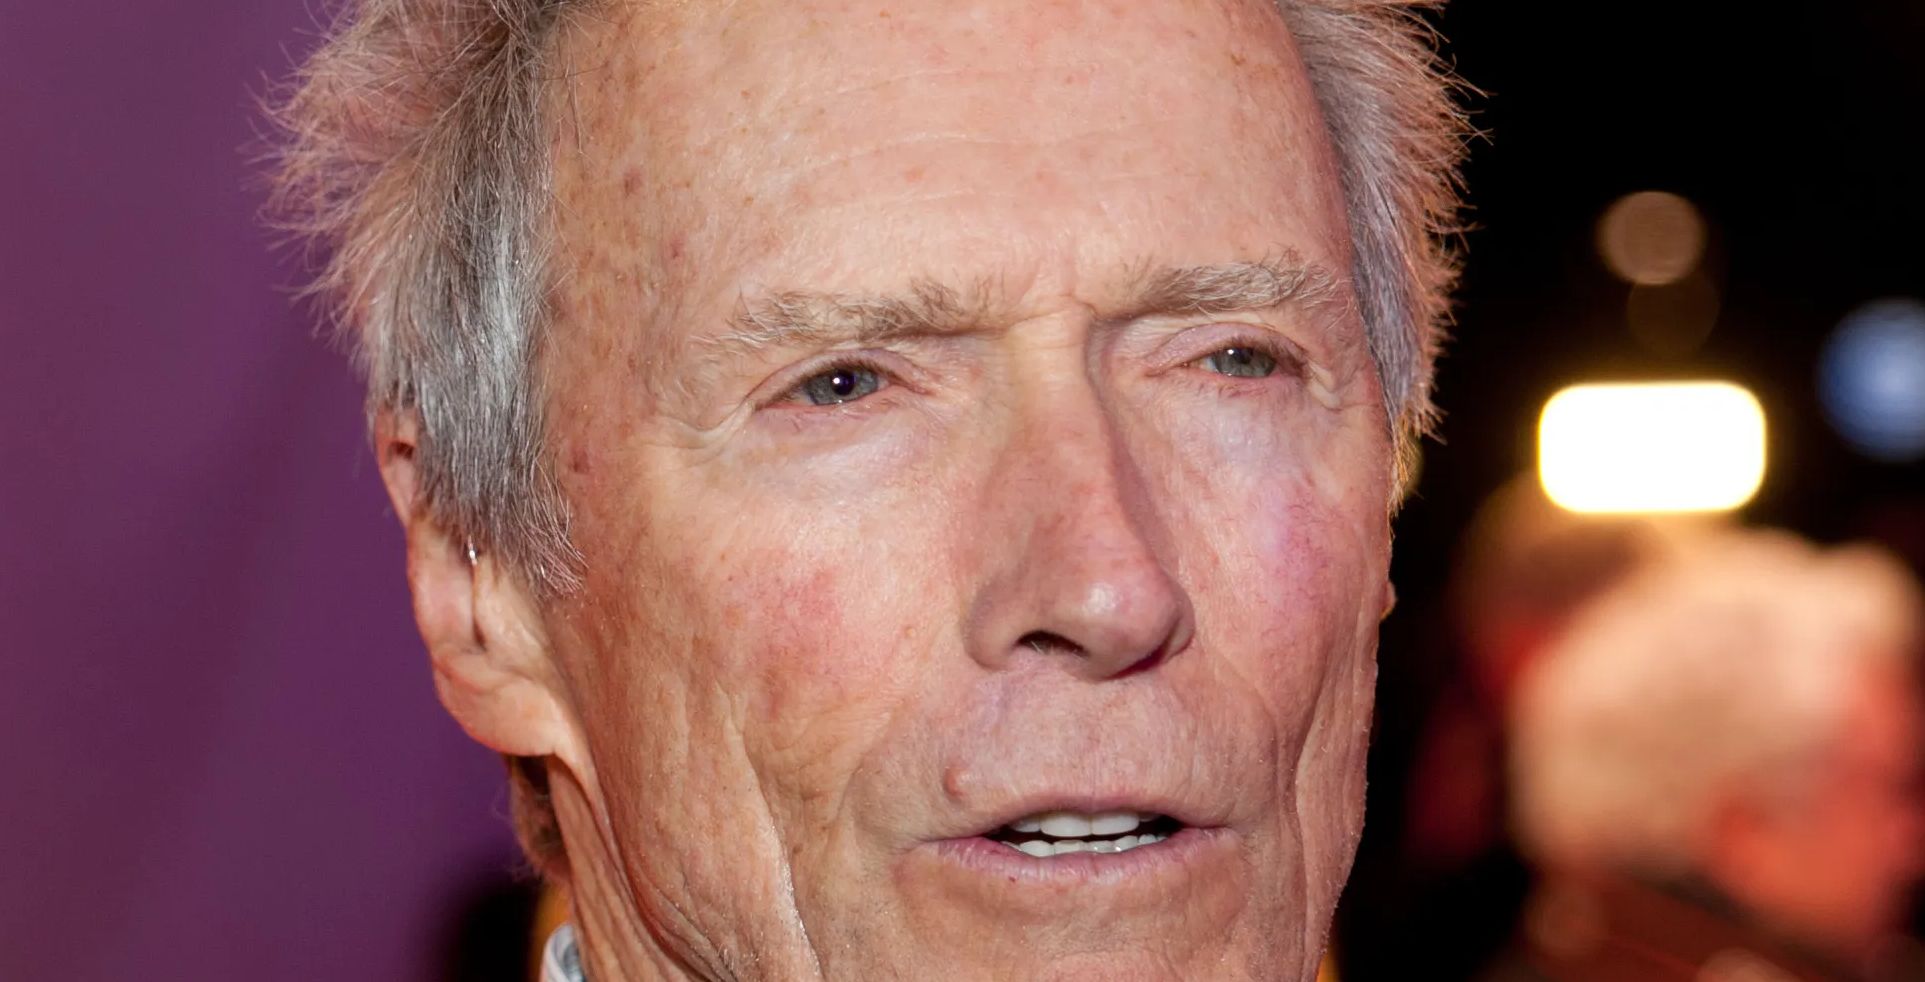 Actor Clint Eastwood looks on.